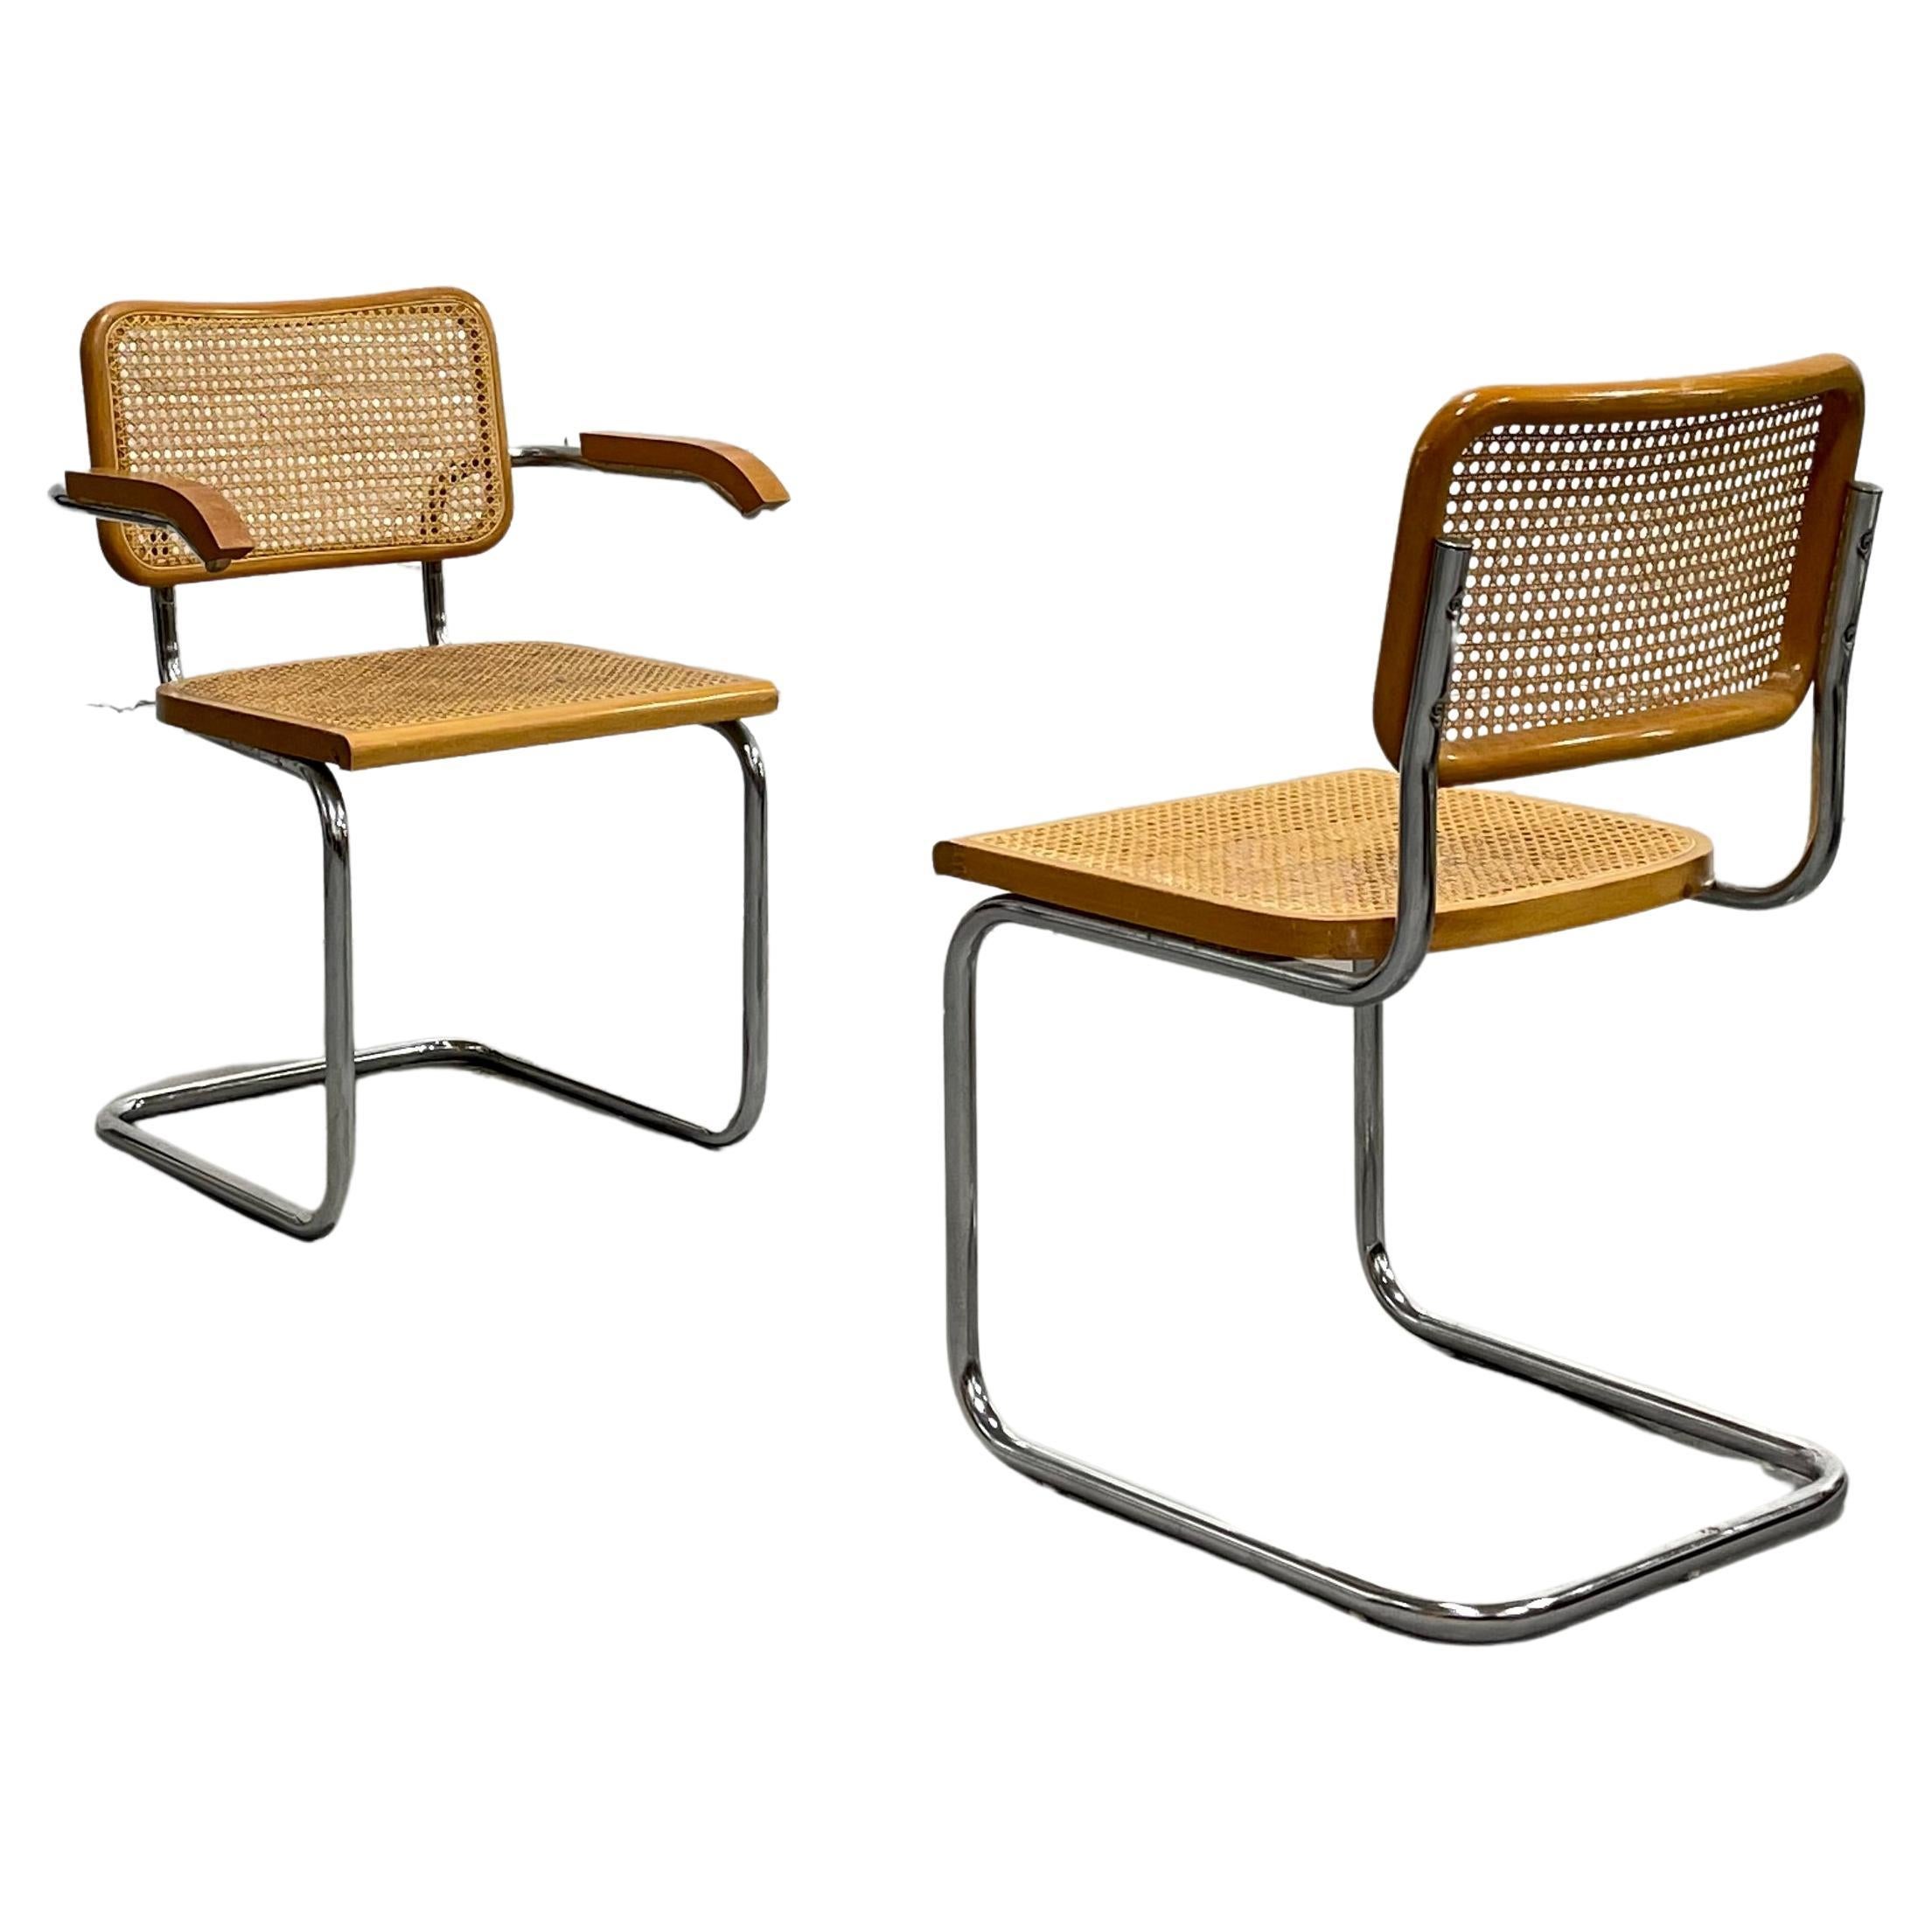 Pair of Marcel Breuer CESCA styled Mid Century Modern DINING CHAIRS